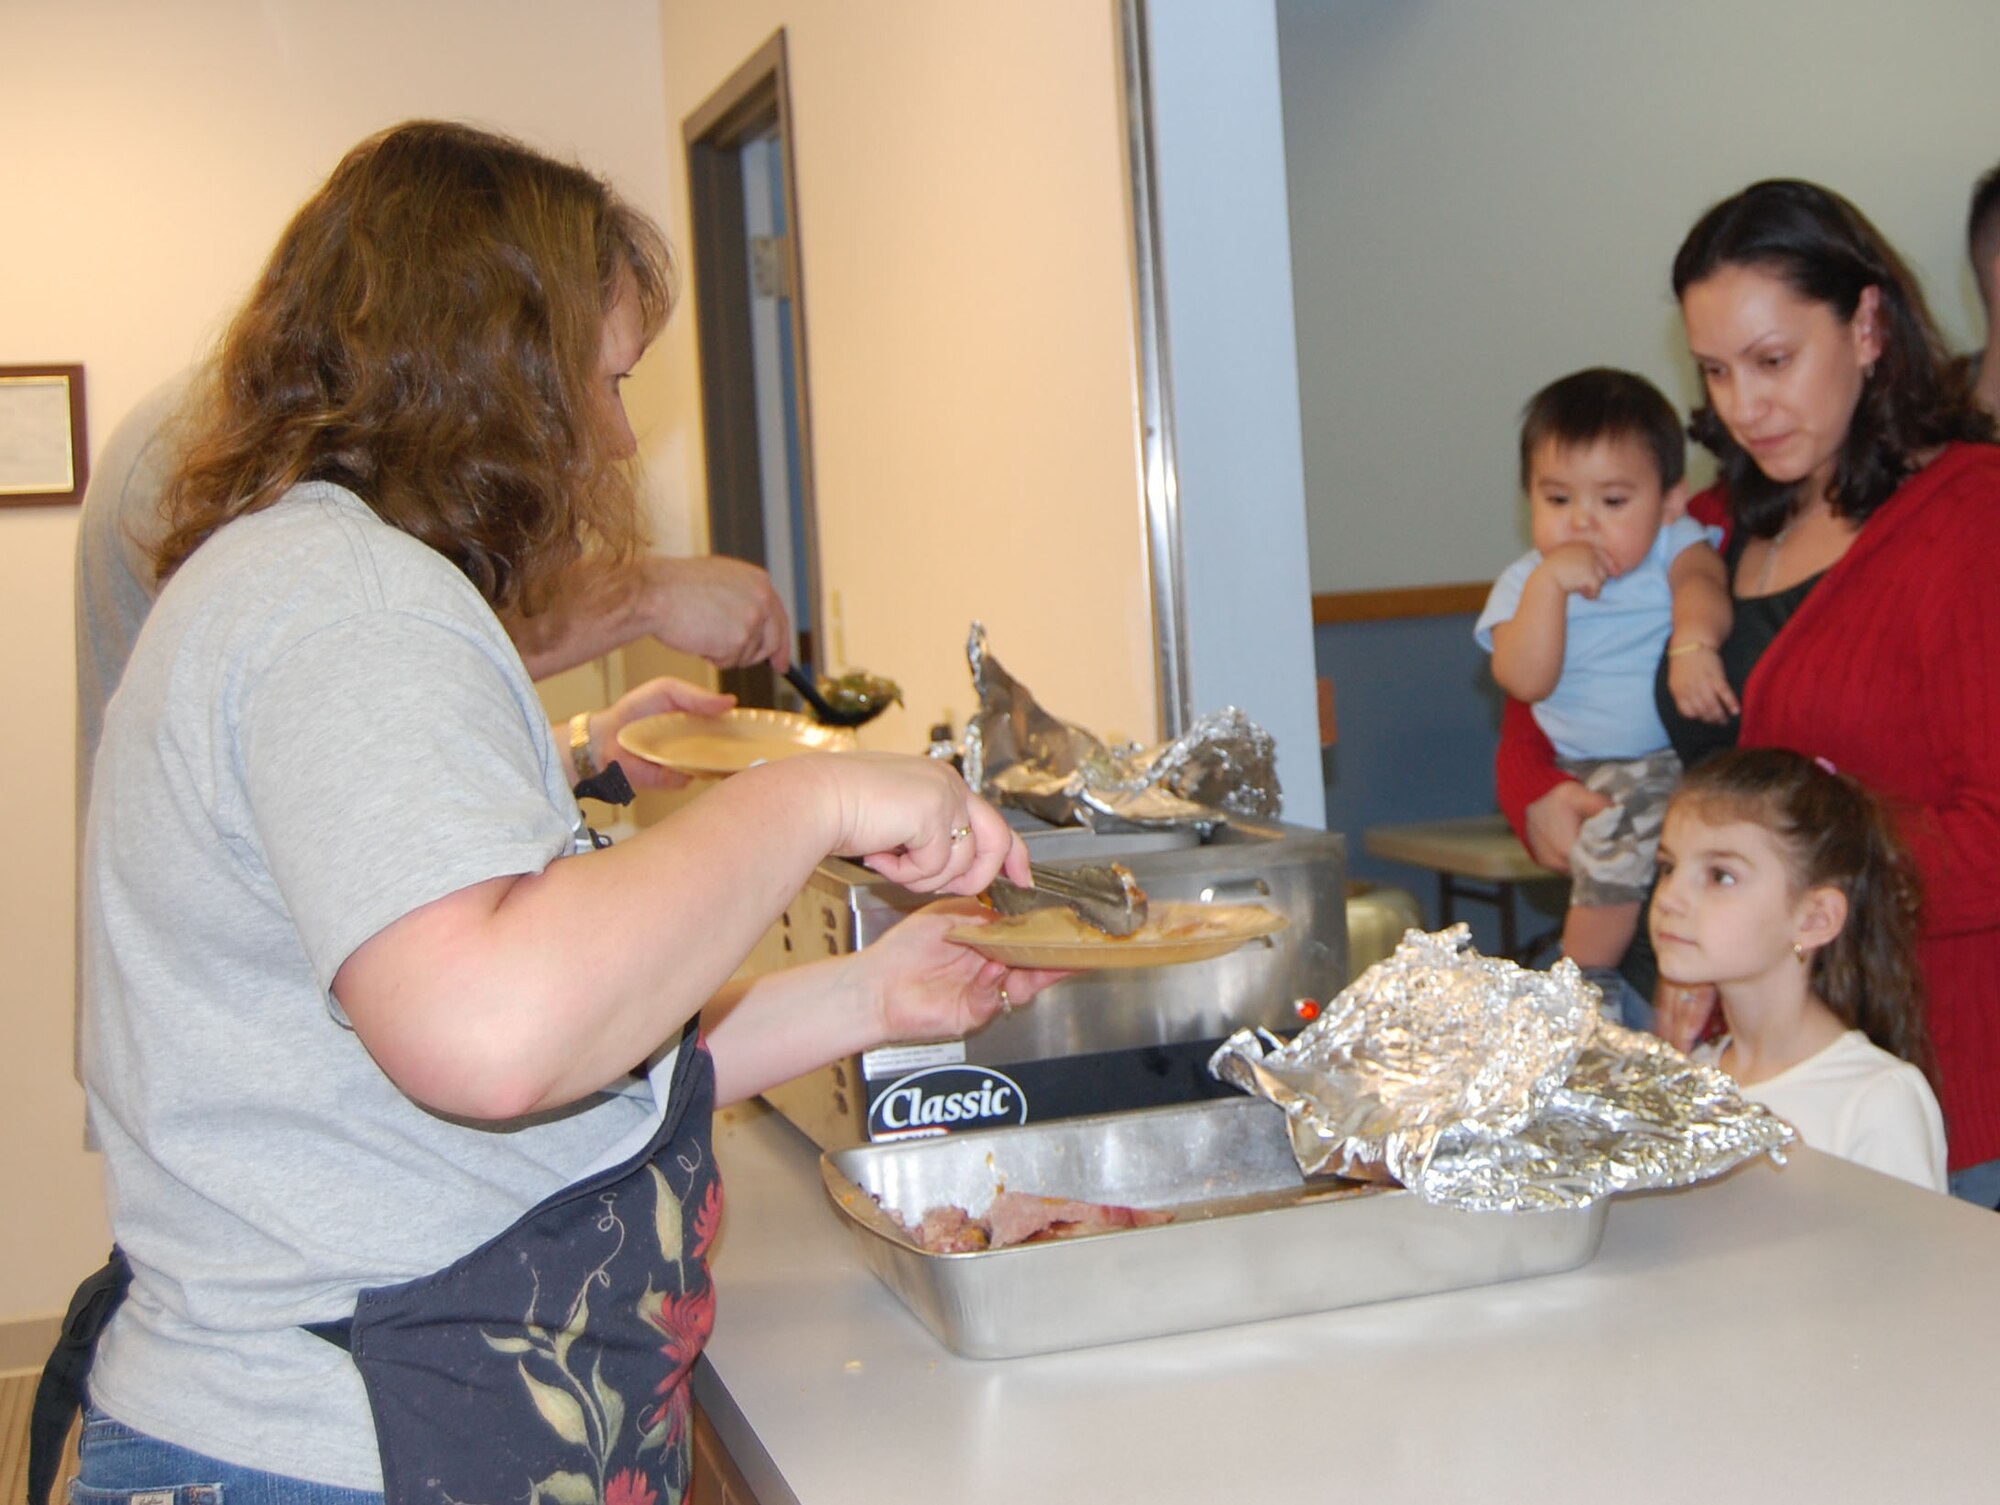 Five-year-old Xani watches as chapel caterer Trina Jackson serves up her food at the chapel's annual community dinner Nov. 23. Her mom, Michele, and 9-month-old brother Pheonix, wait to get their food next. (U.S. Air Force photo/Valerie Mullett)